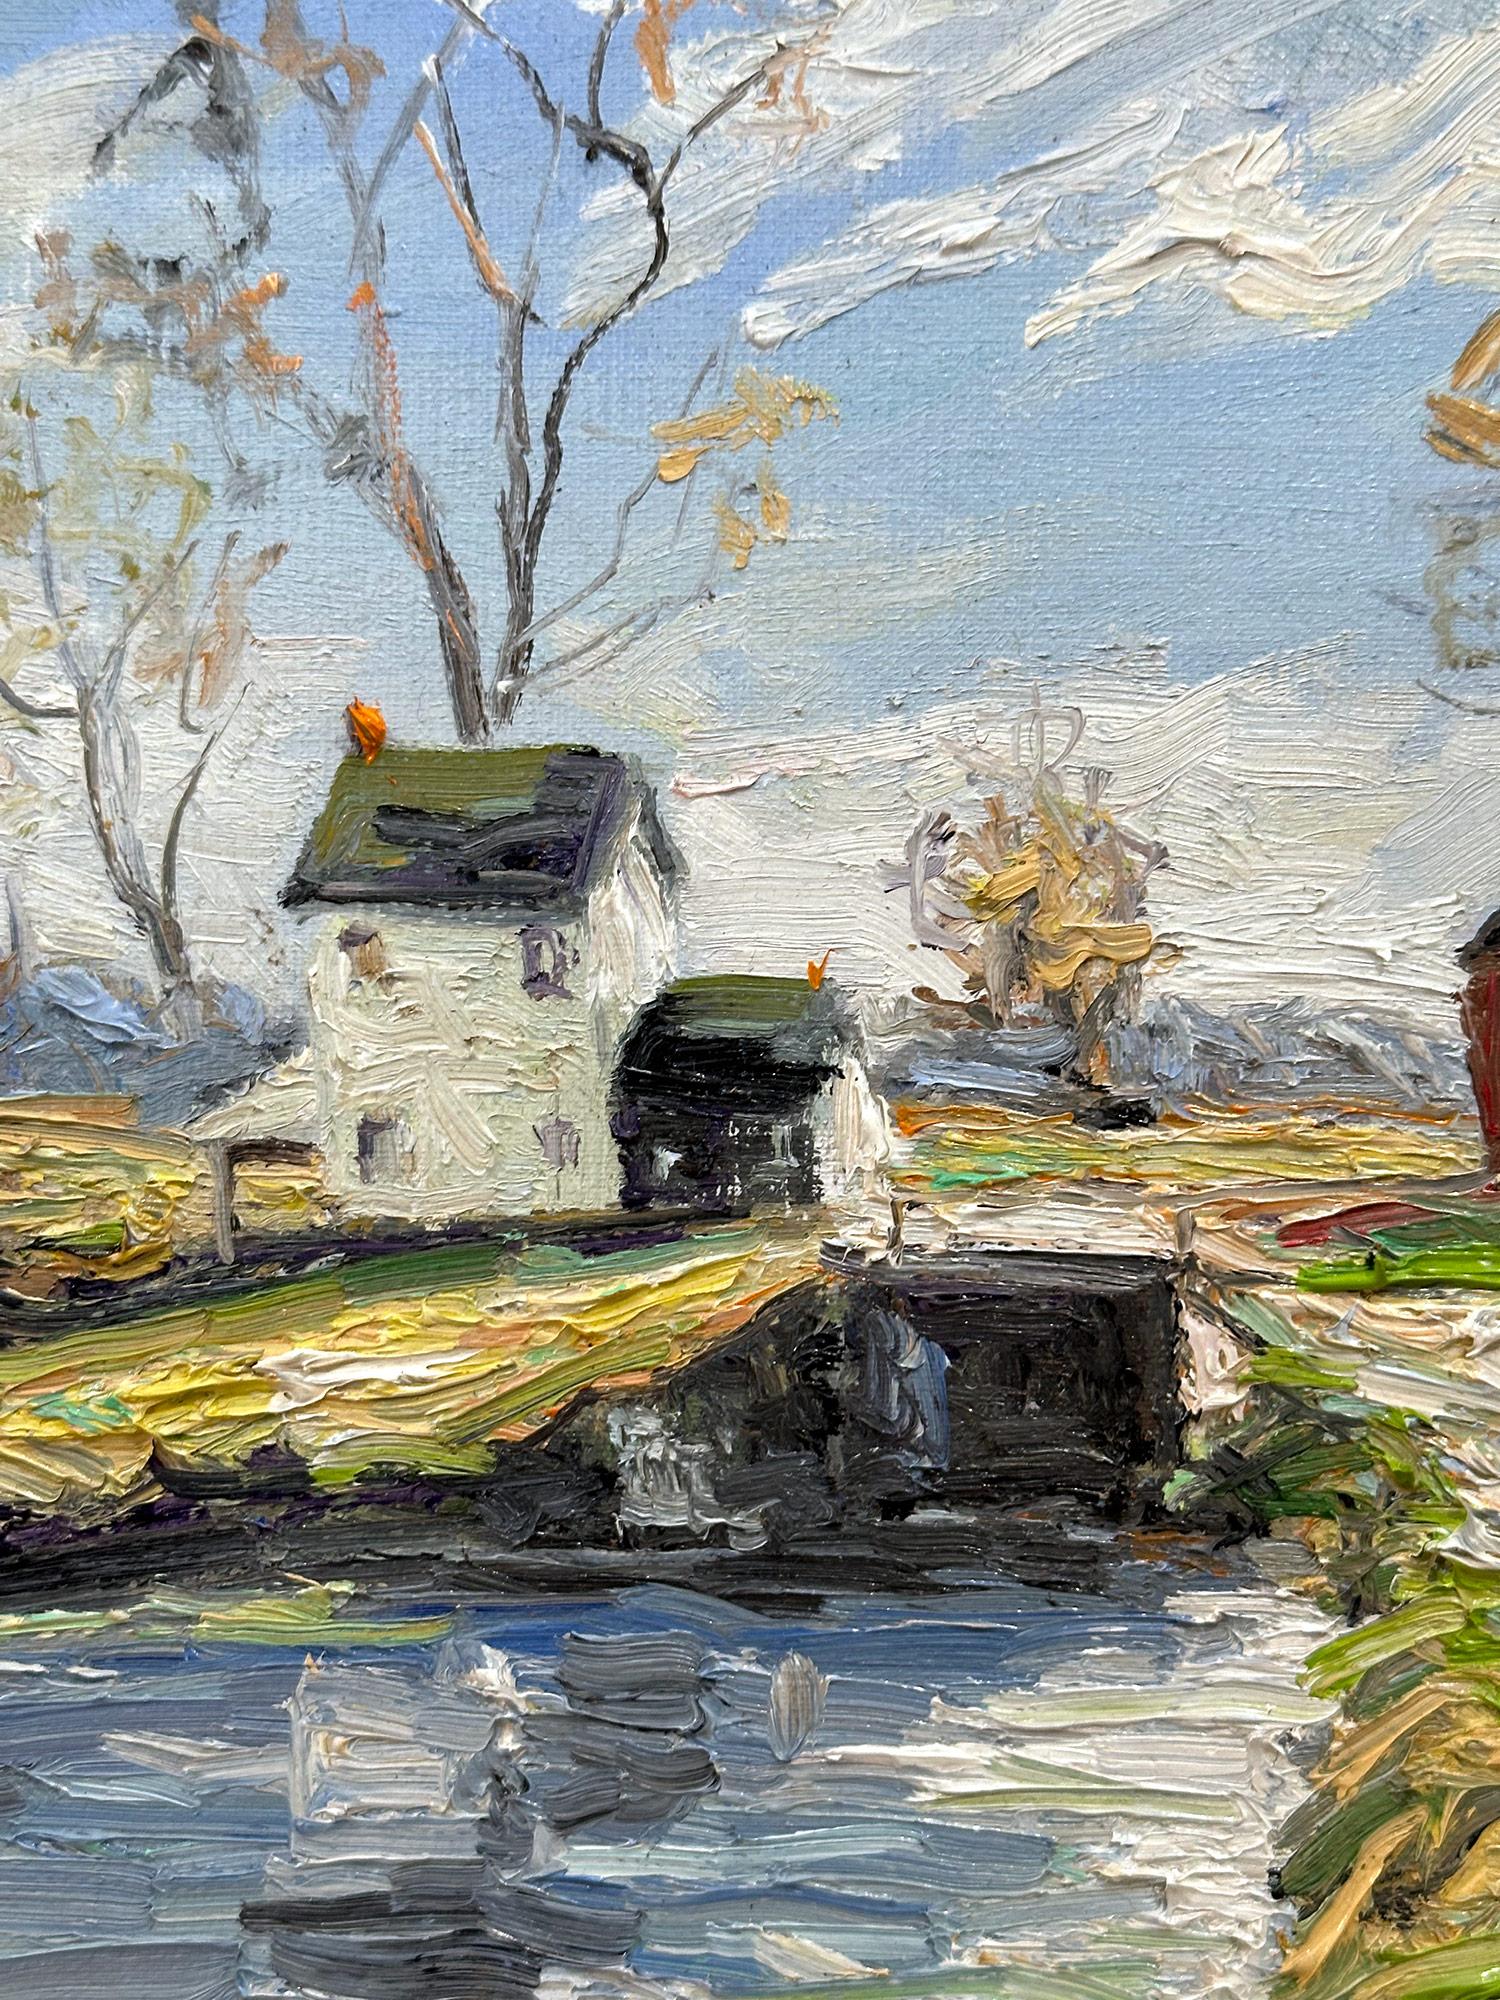 A wonderful Impressionist summer pastoral scene of a colorful and quaint home by the stream. Willet has portrayed this piece in a most intimate, yet energetic way, and has packed much feeling into this vibrant work. It is almost as if we are there